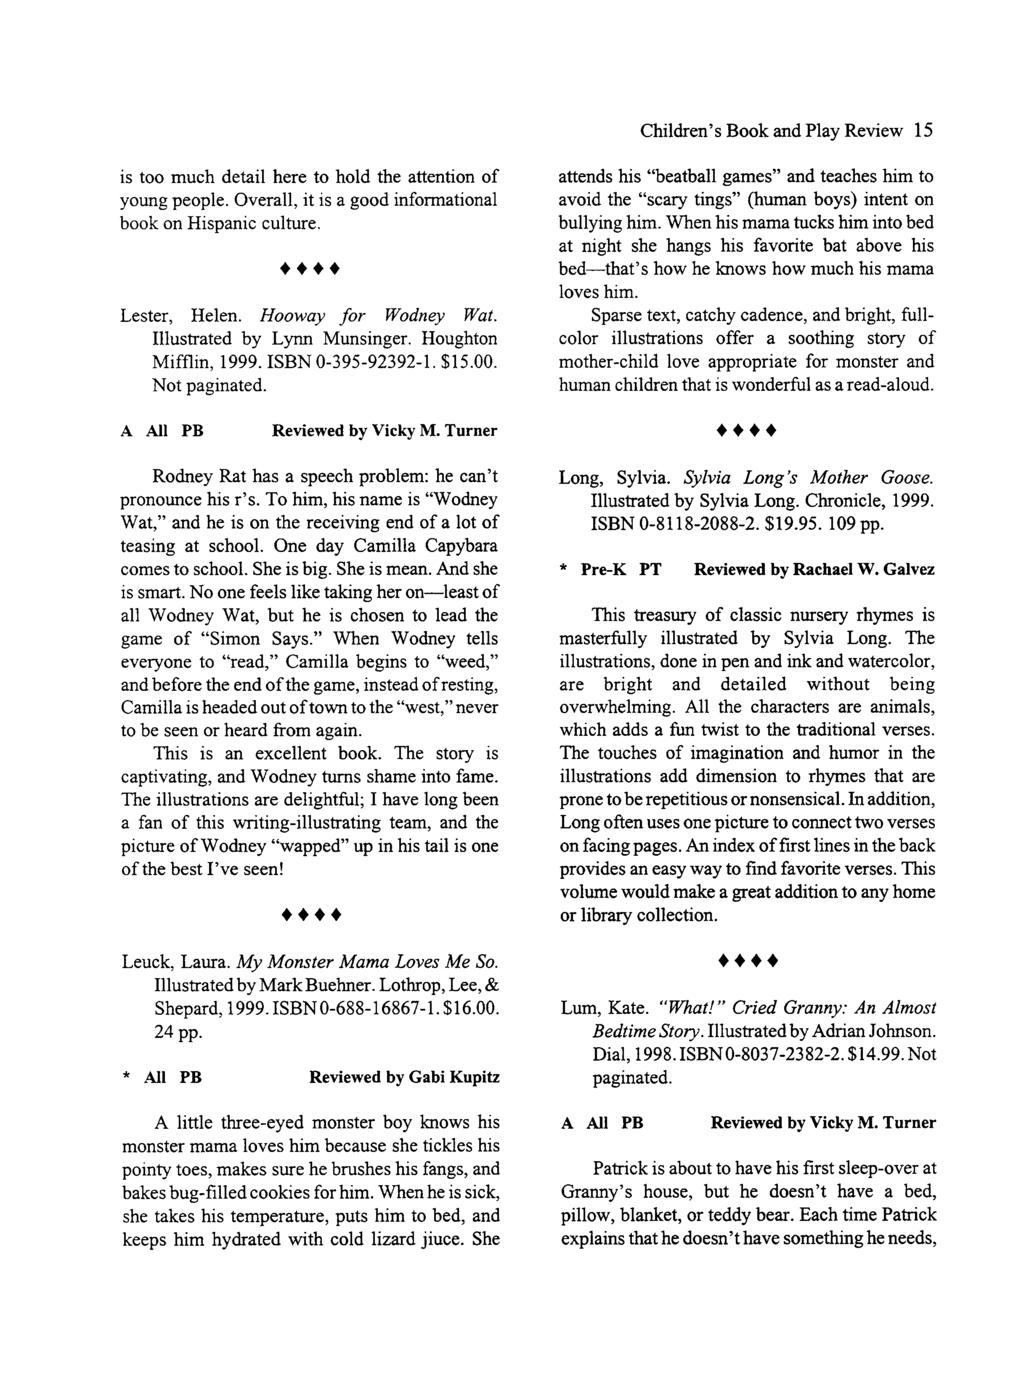 Children's Book and Media Review, Vol. 20 [1999], Iss. 4, Art. 4 Children's Book and Play Review 15 is too much detail here to hold the attention of young people.